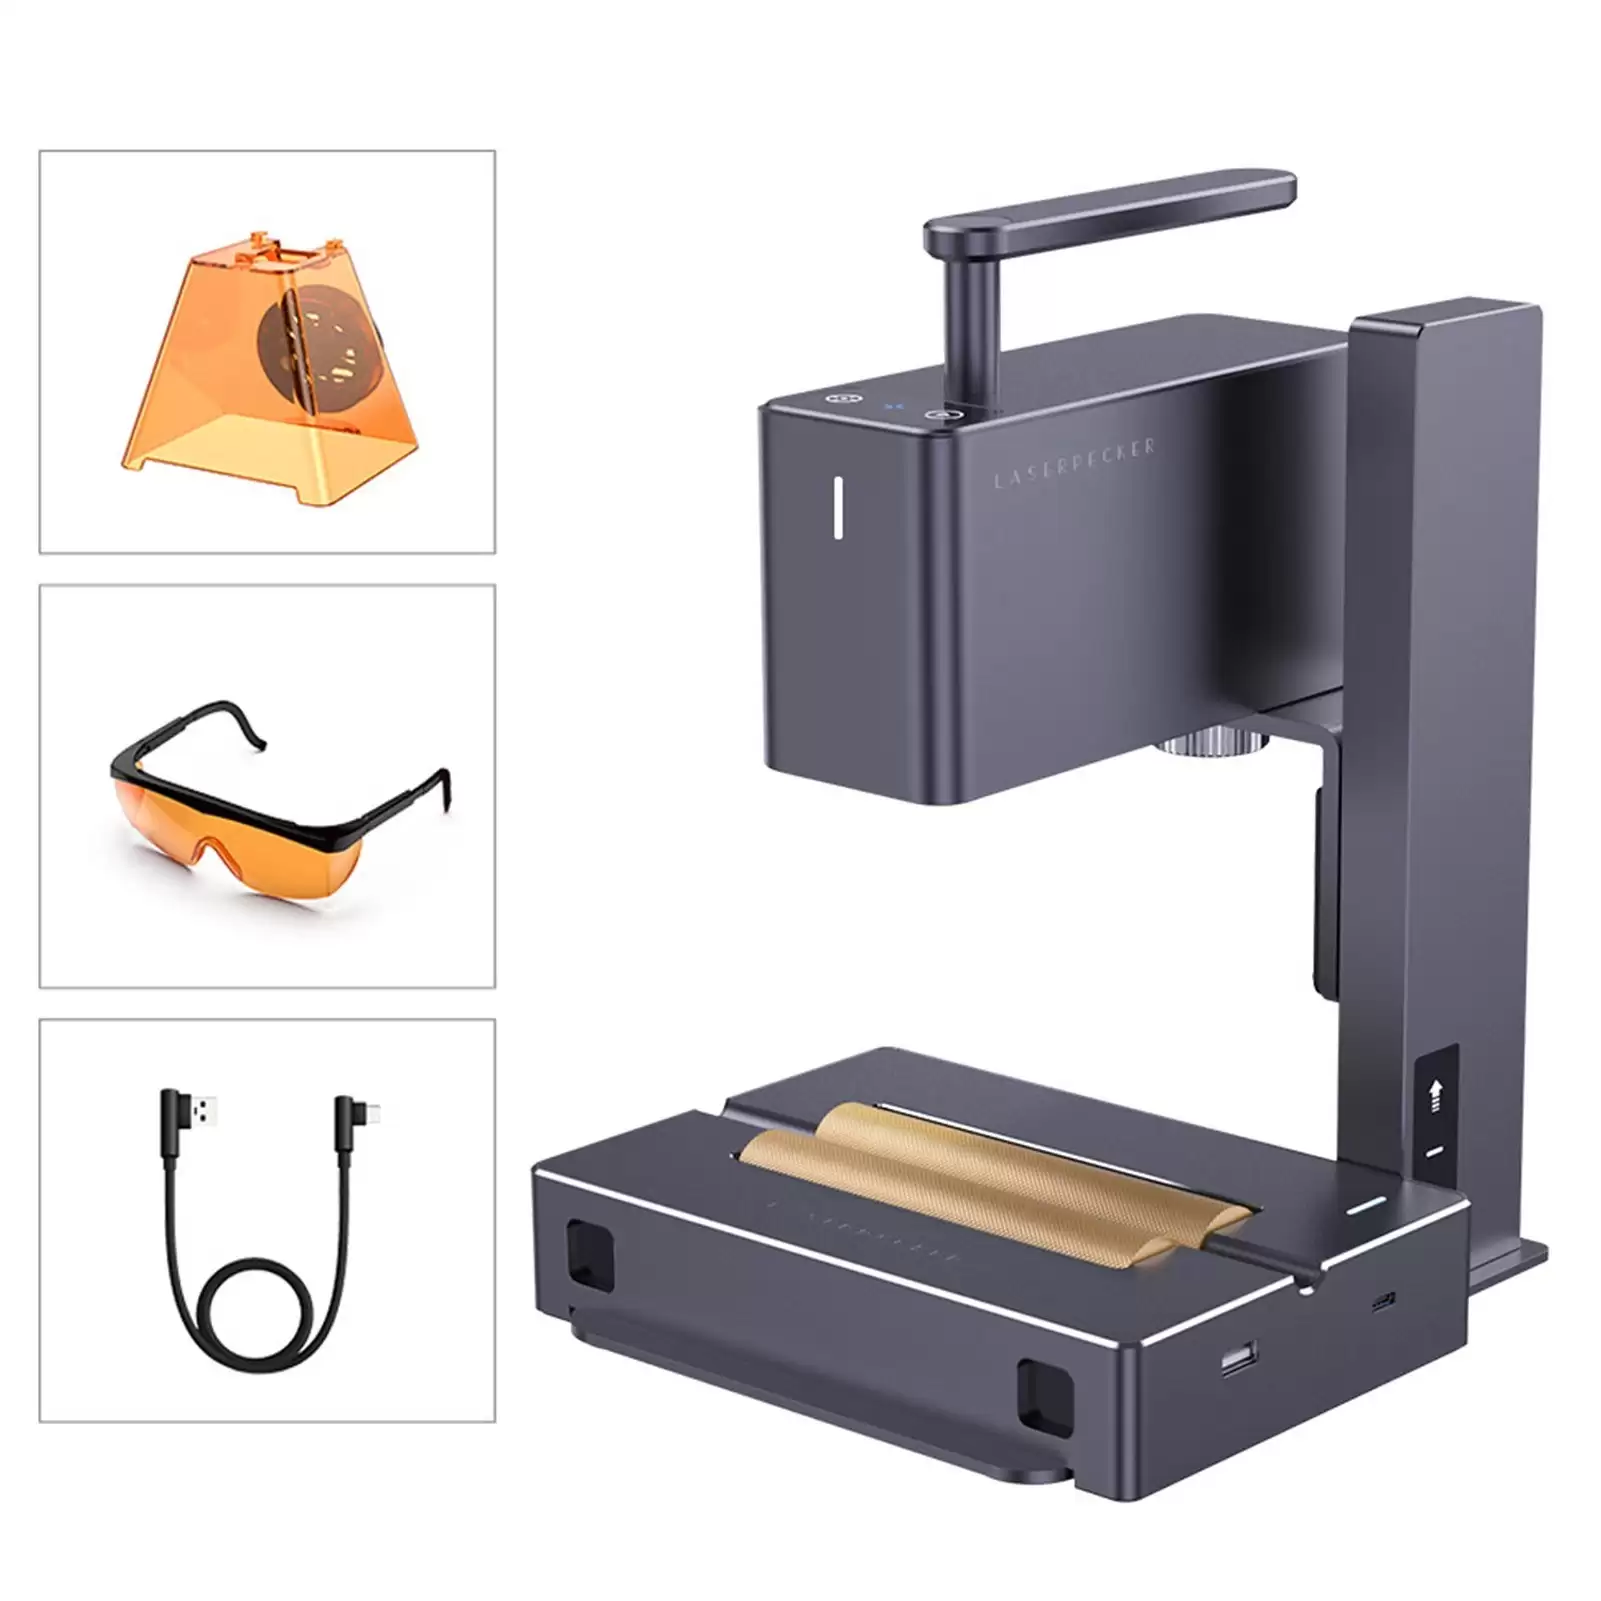 Pay $769 For Laserpecker 2 Pro Version 5w Semiconductor Laser Handheld Laser Engraver ,free Shipping With This Cafago Discount Voucher